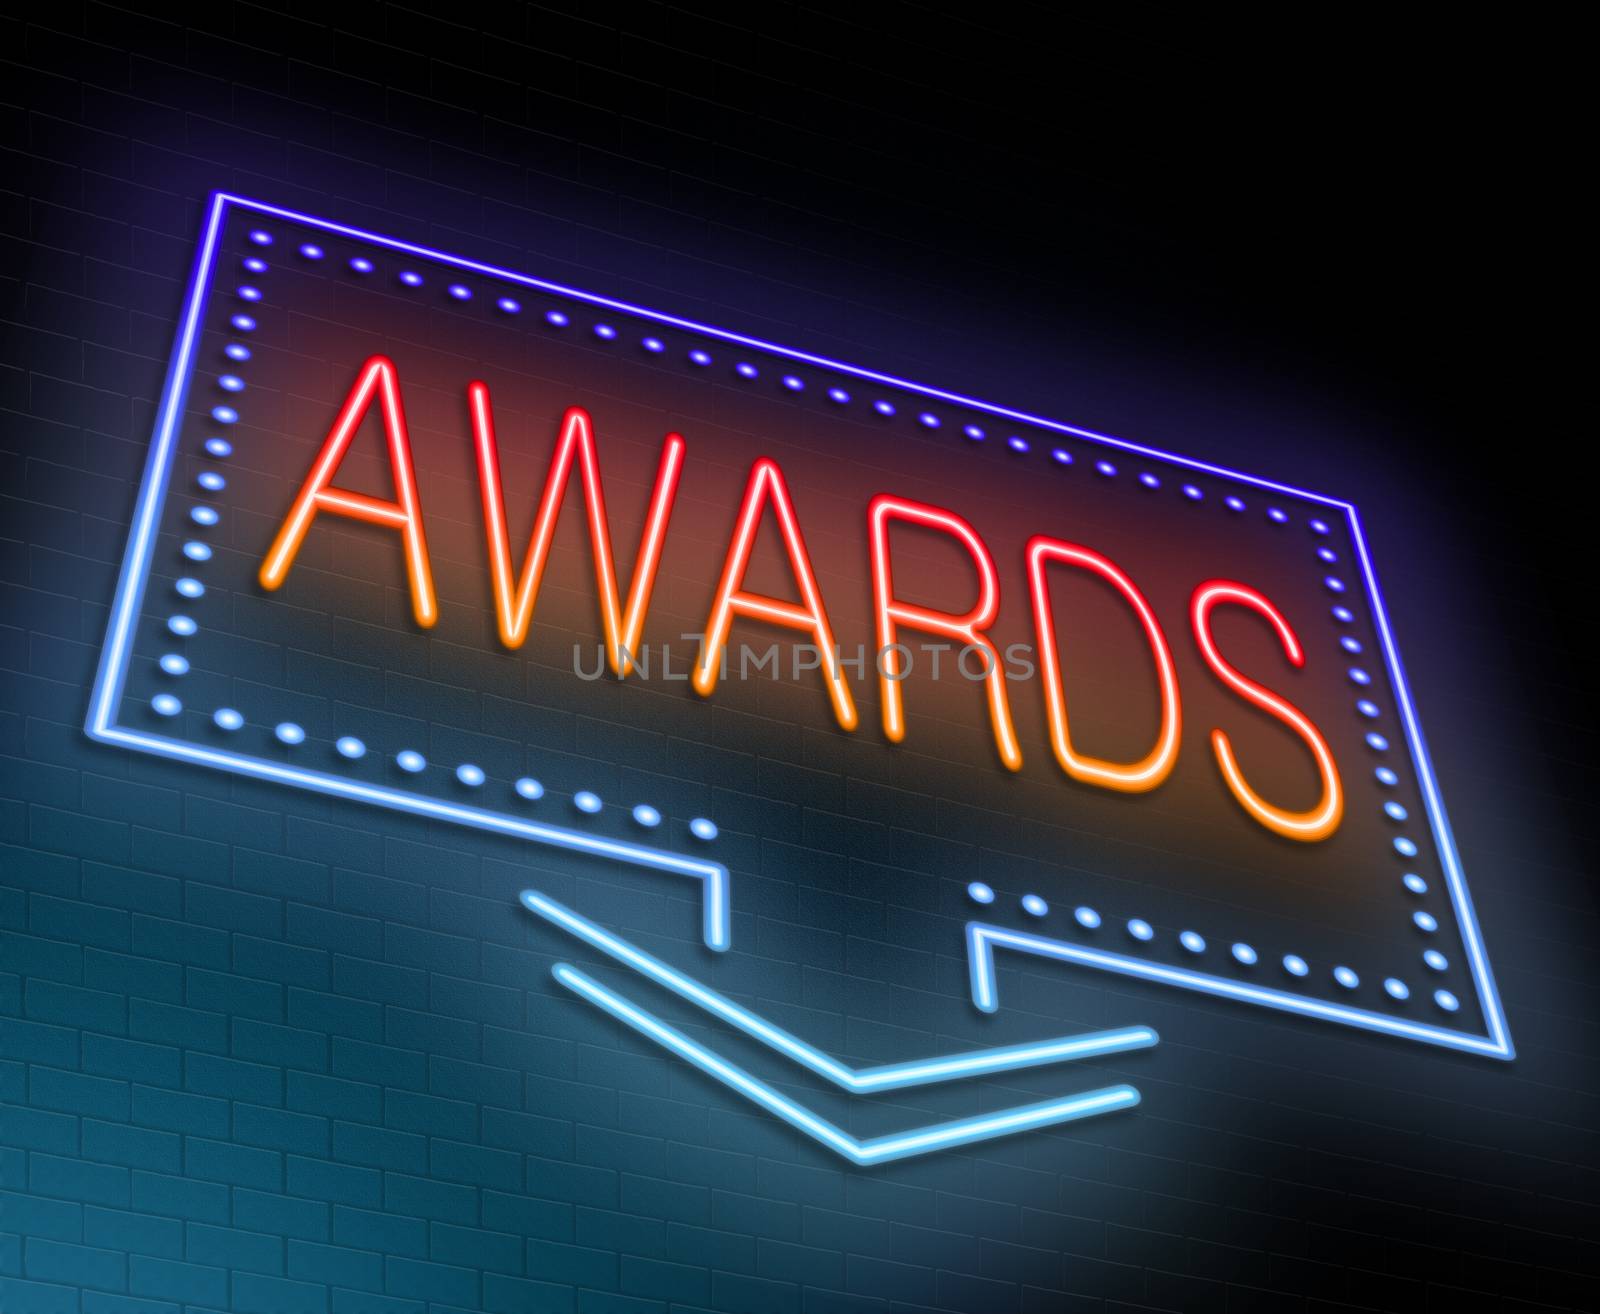 Illustration depicting an illuminated neon sign with an awards concept.